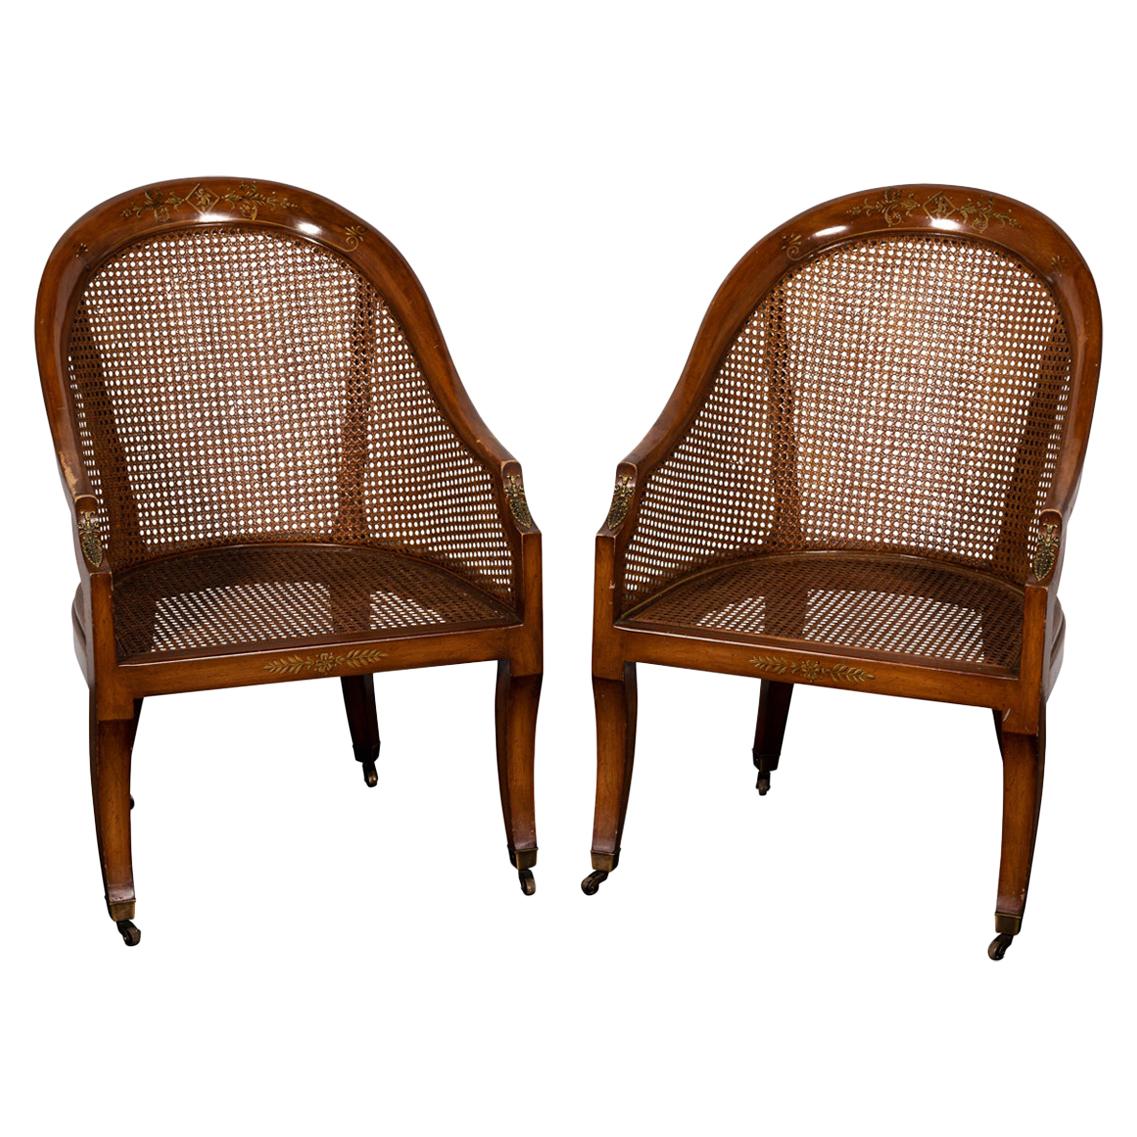 Pair of Walnut Spoon Back Chairs